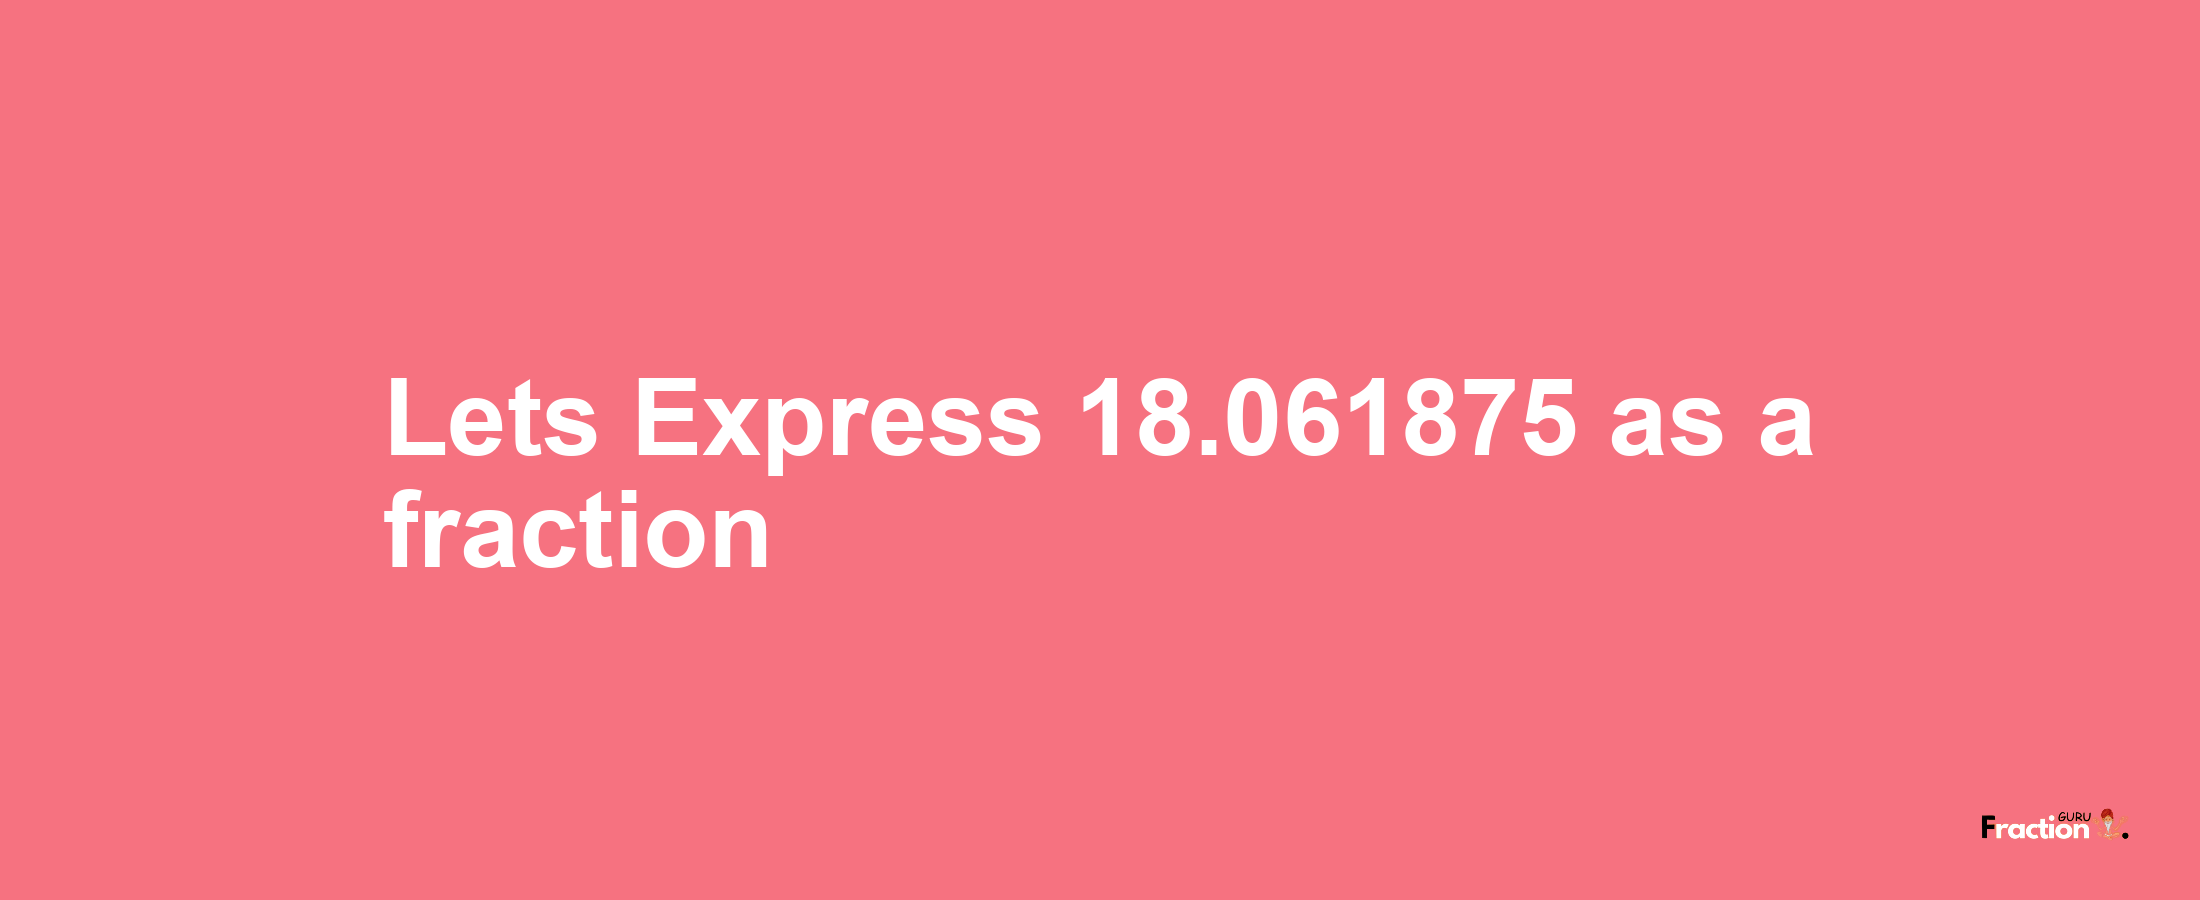 Lets Express 18.061875 as afraction